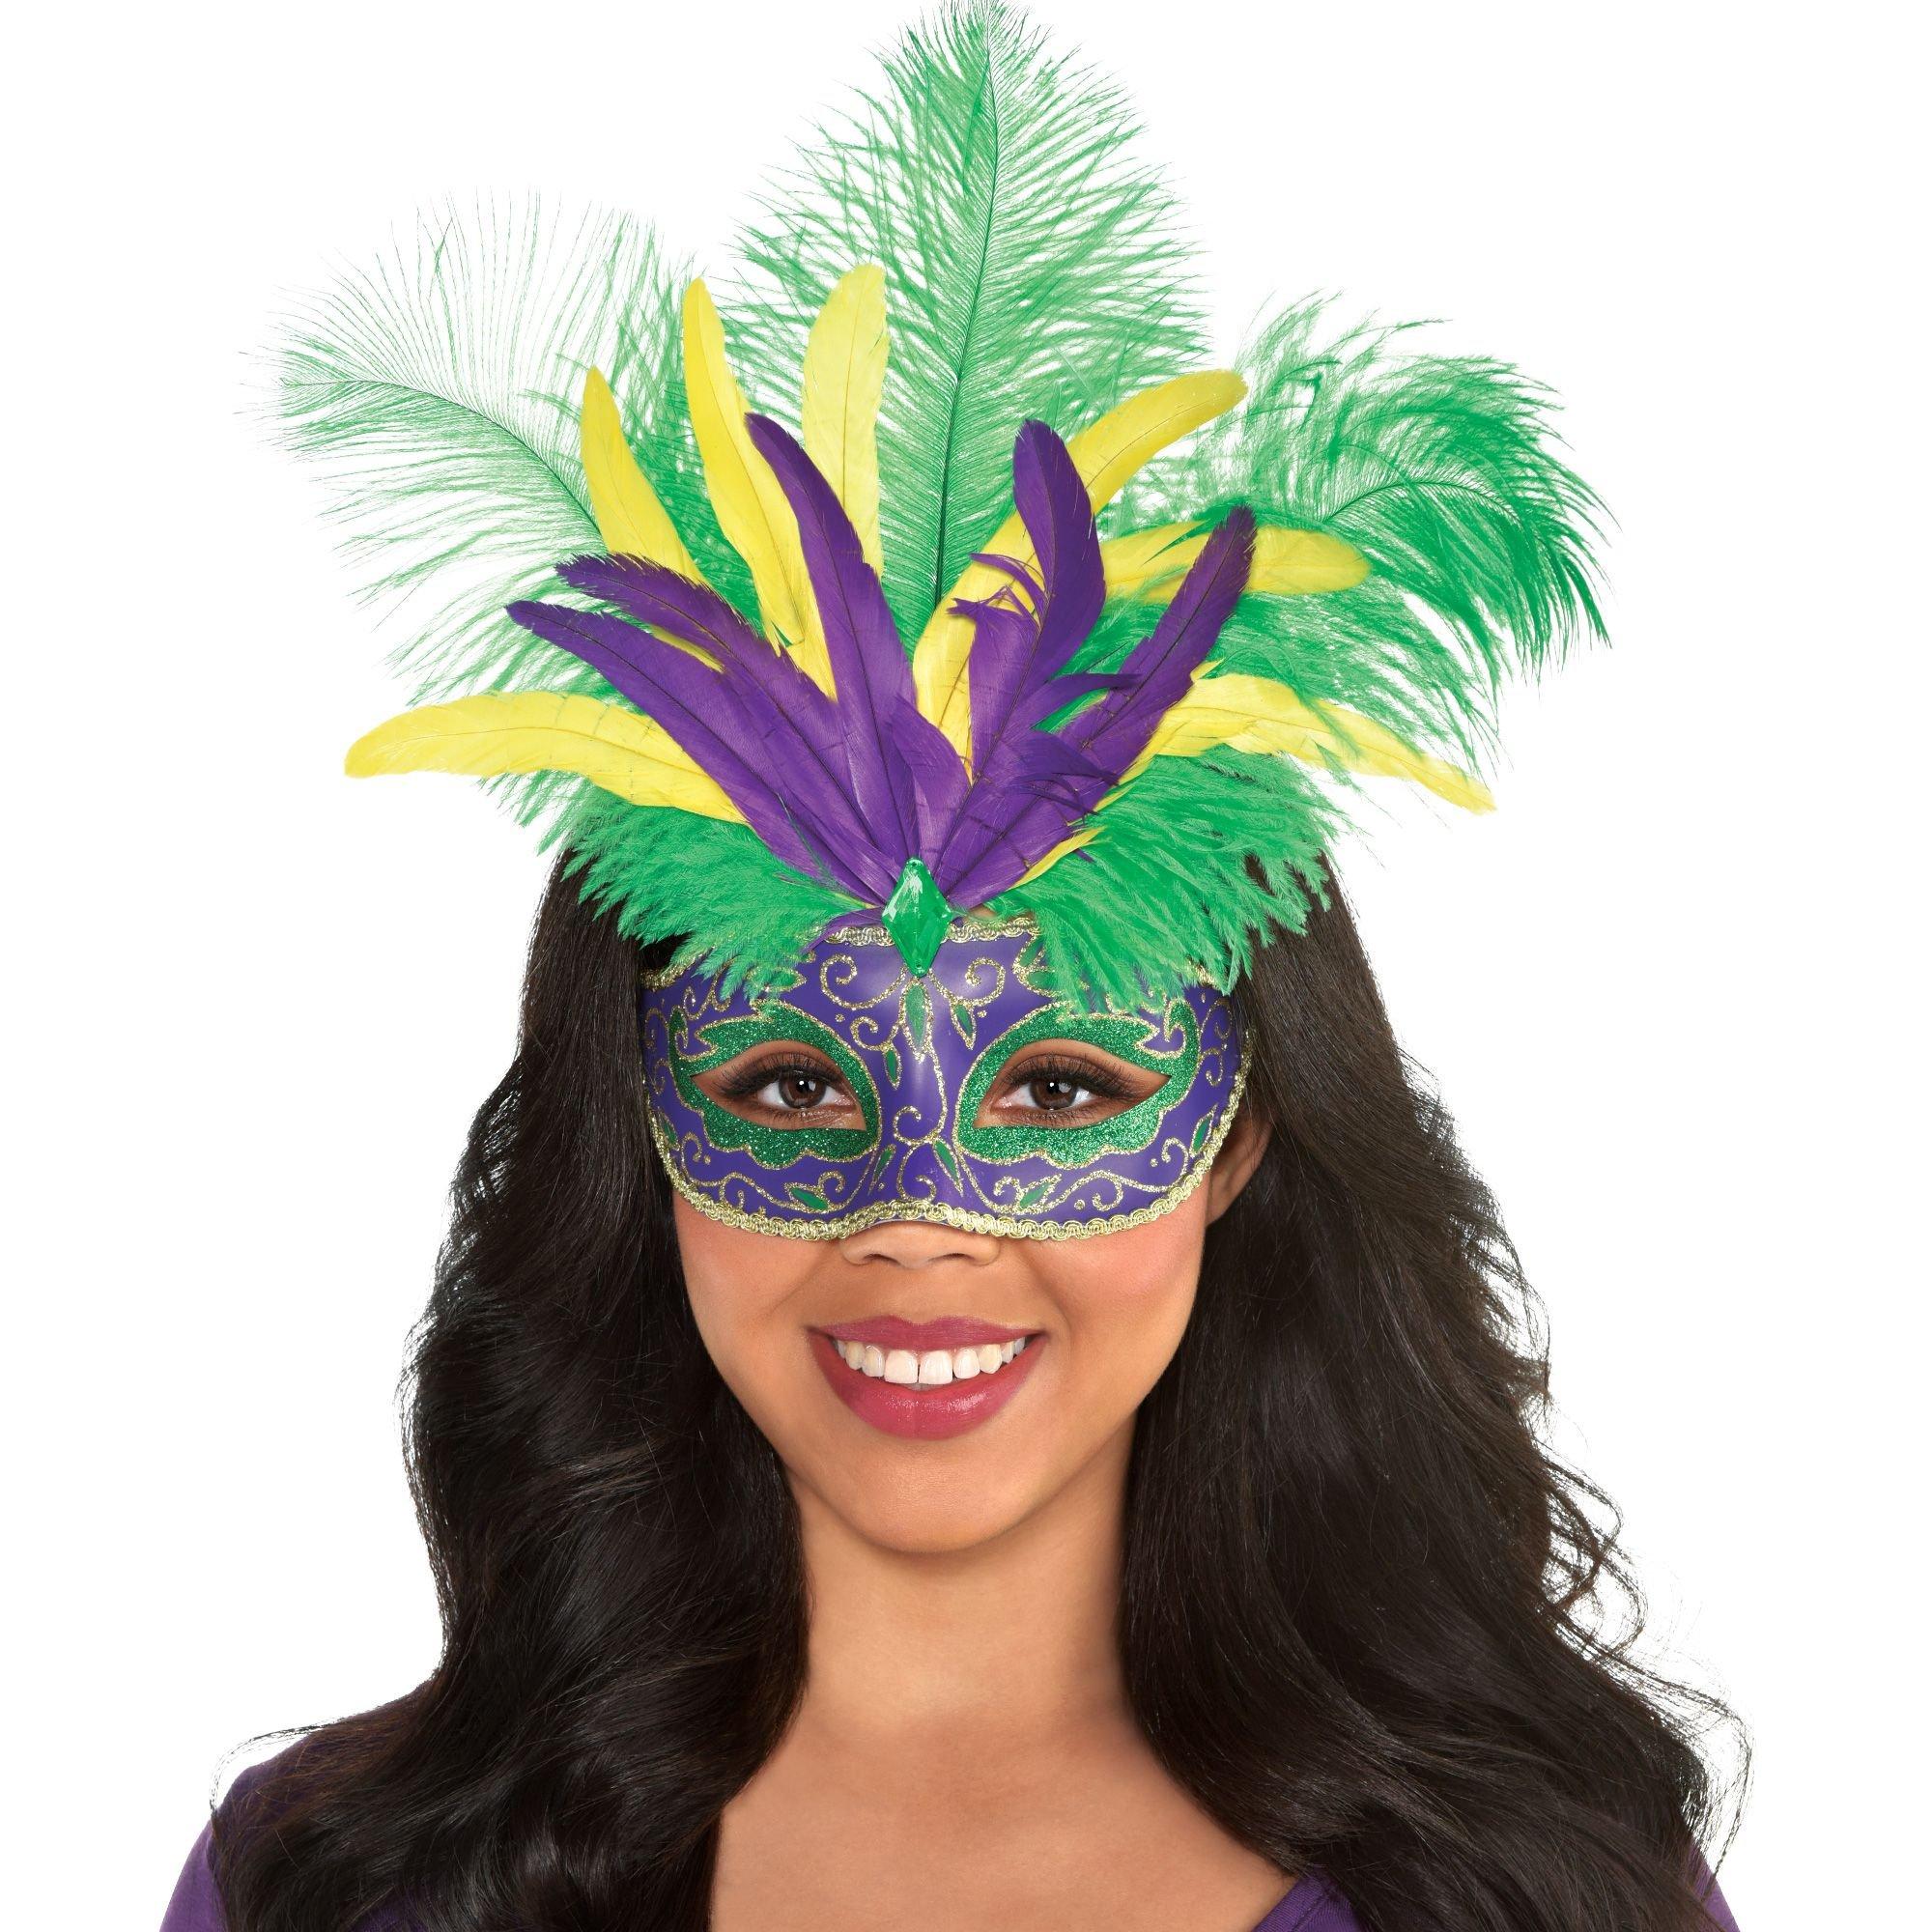 Mardi Gras Decorations Party, Feather Headwear Banner